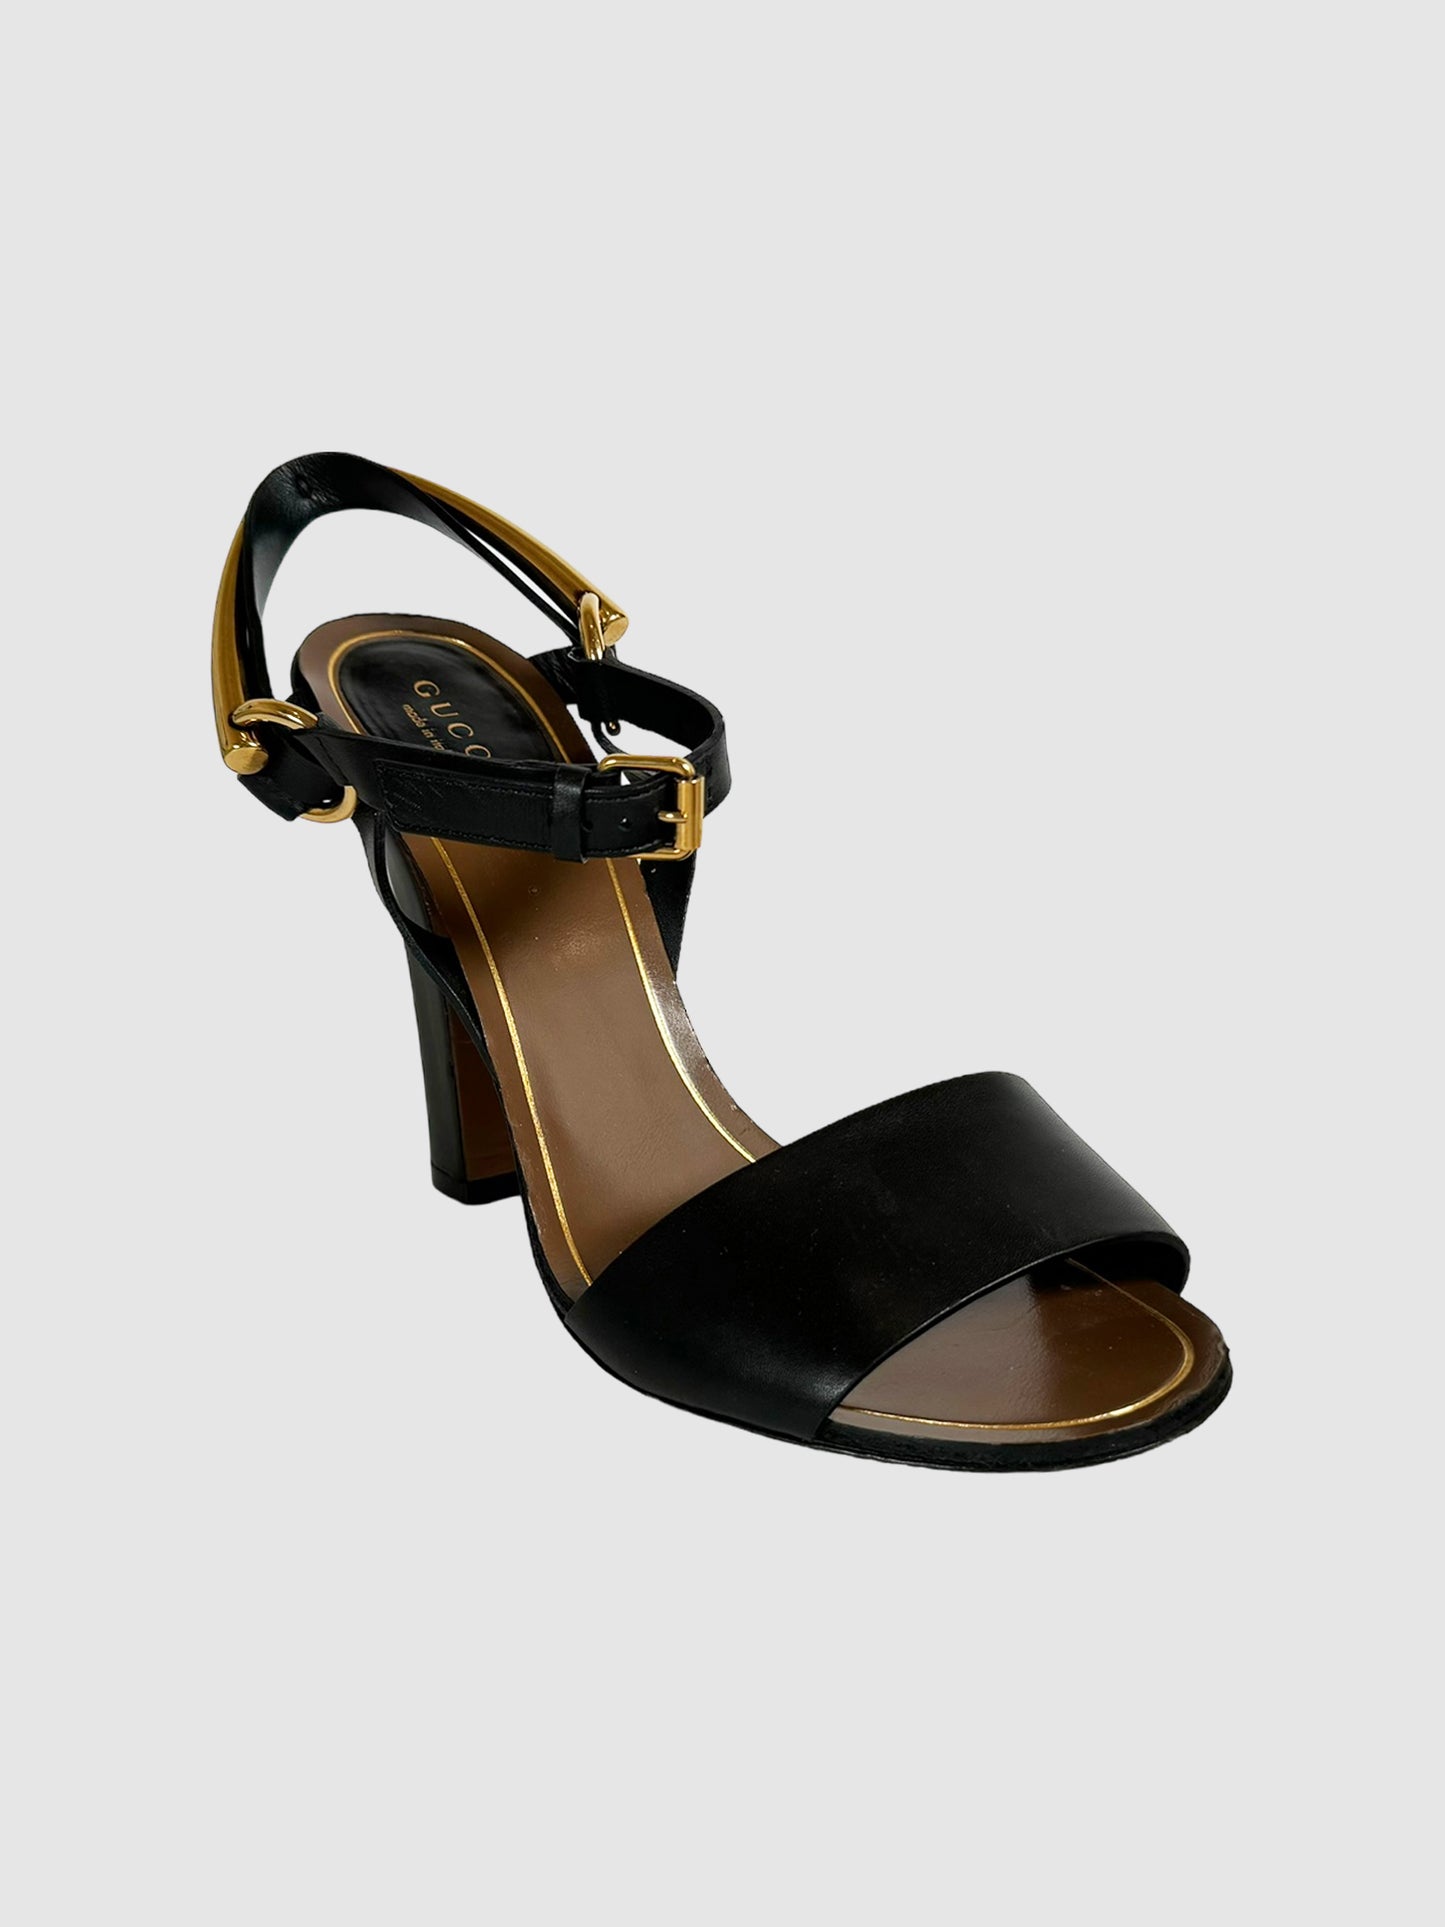 Gucci Black Leather Strappy Sandals with Gold-Tone Buckle Design on Ankle Designer Thrift Luxury Consignment